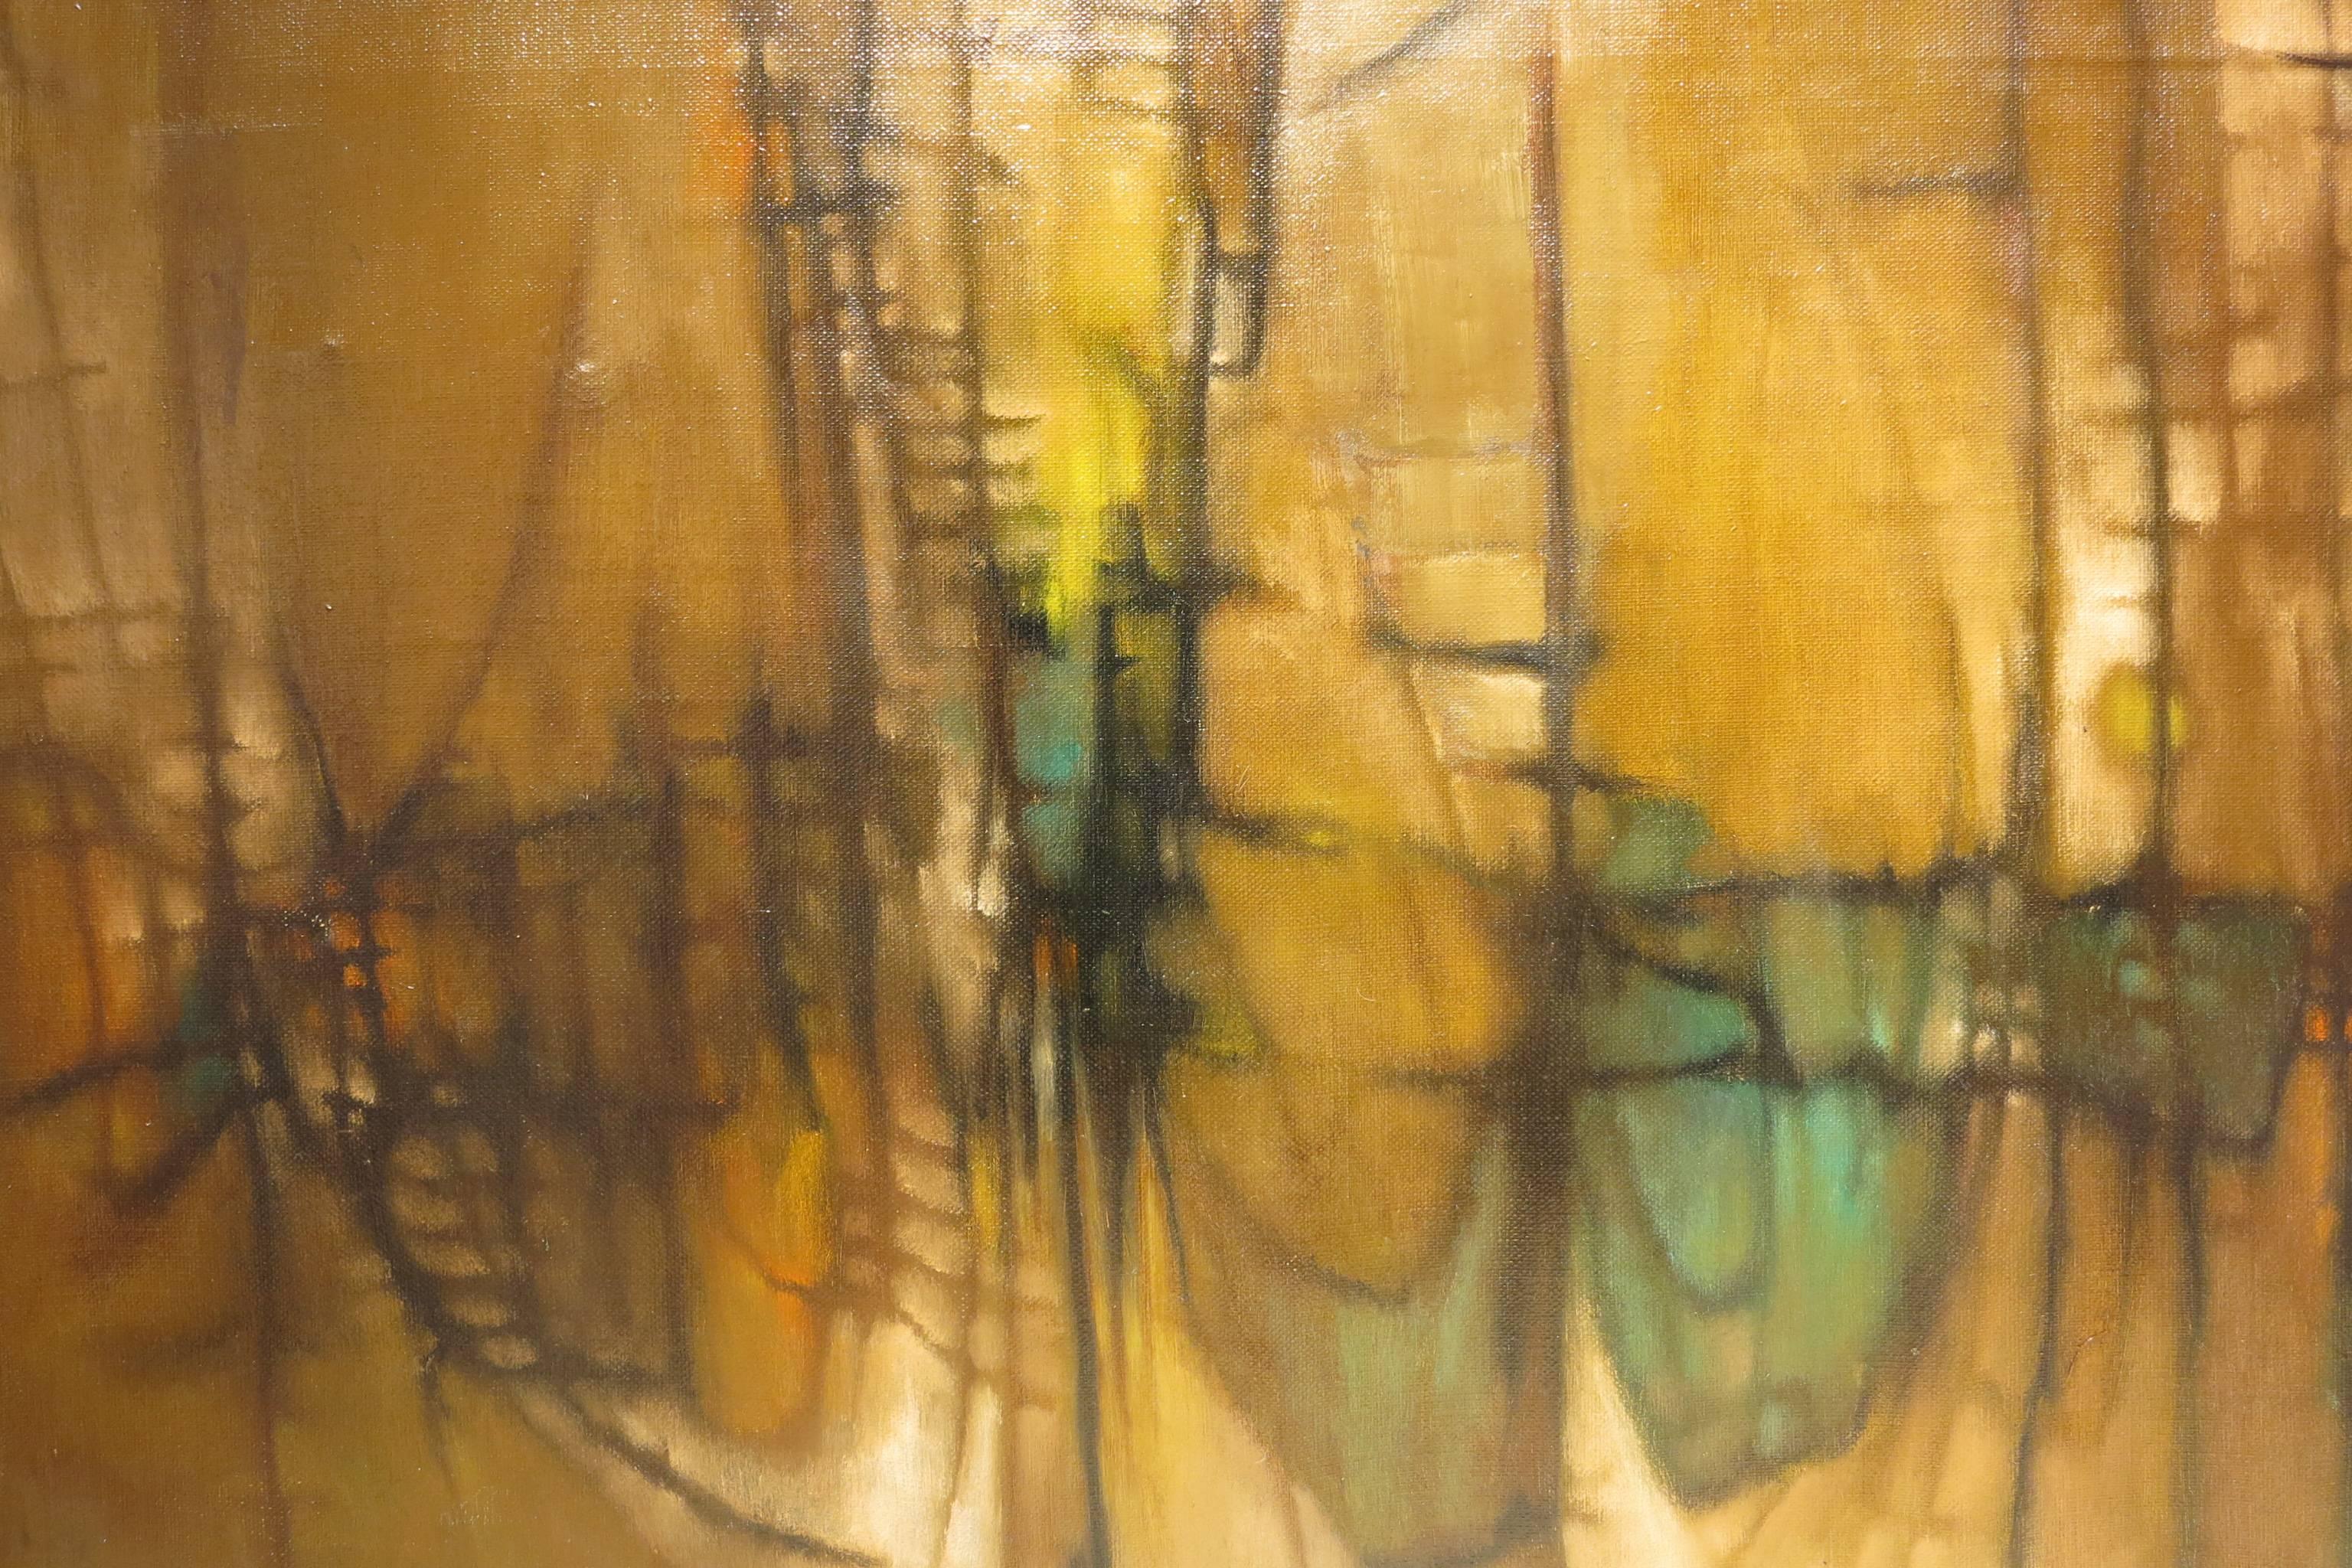 Web & Accents on Tan (Mid-century abstract expressionist composition) - Brown Abstract Painting by Jesse Redwin Bardin